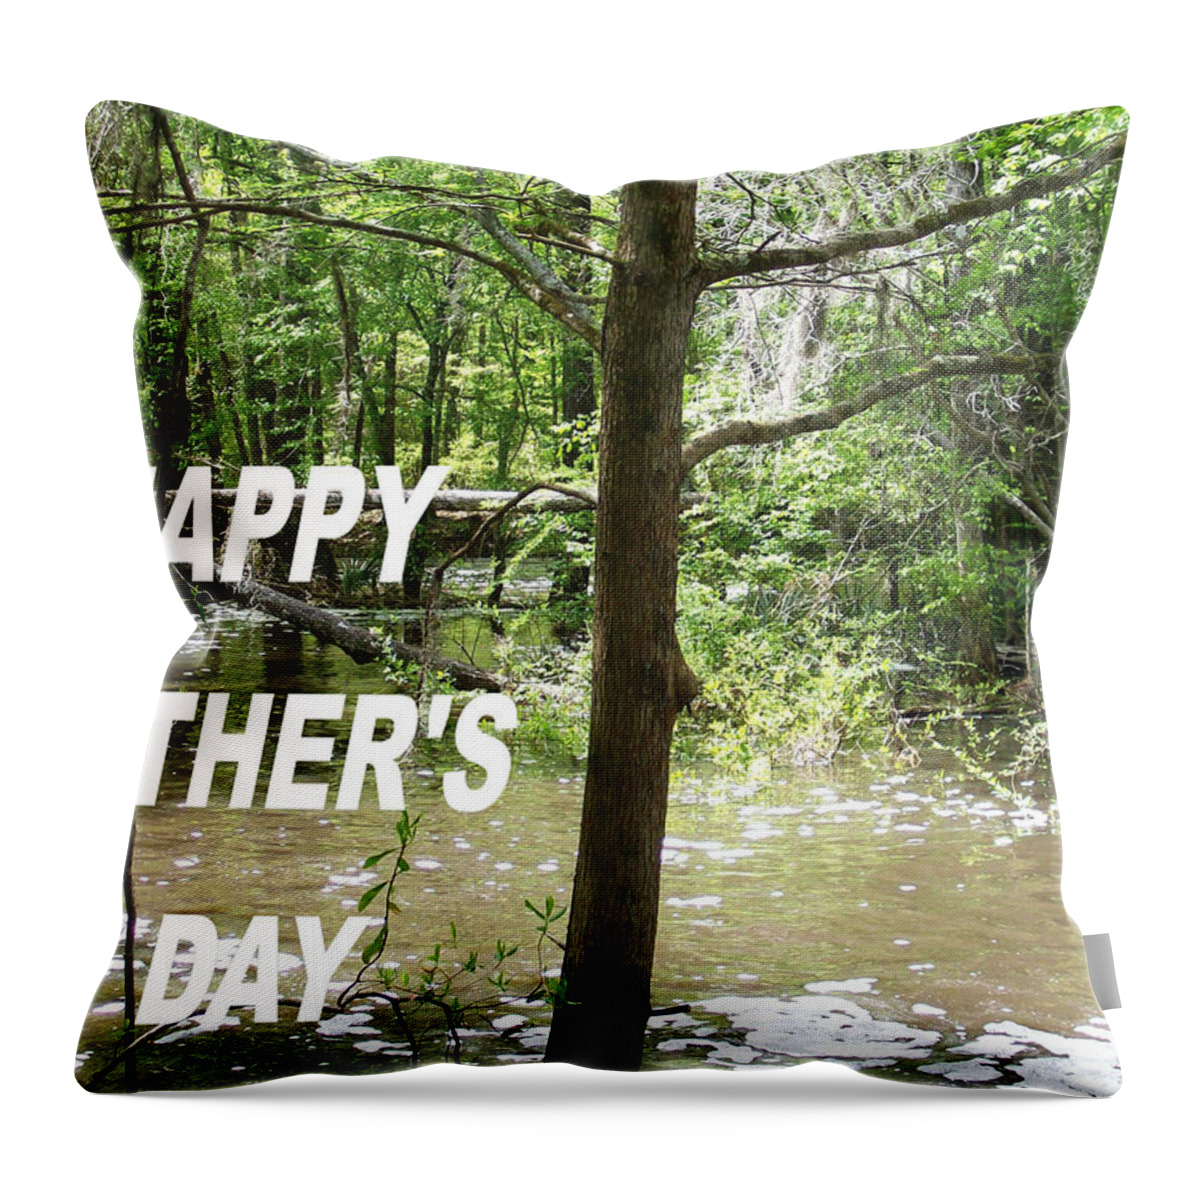 #fathersday #fishing #hole #mill #pond #oakfield #georgia Throw Pillow featuring the photograph Dads Fishing Hole by Belinda Lee